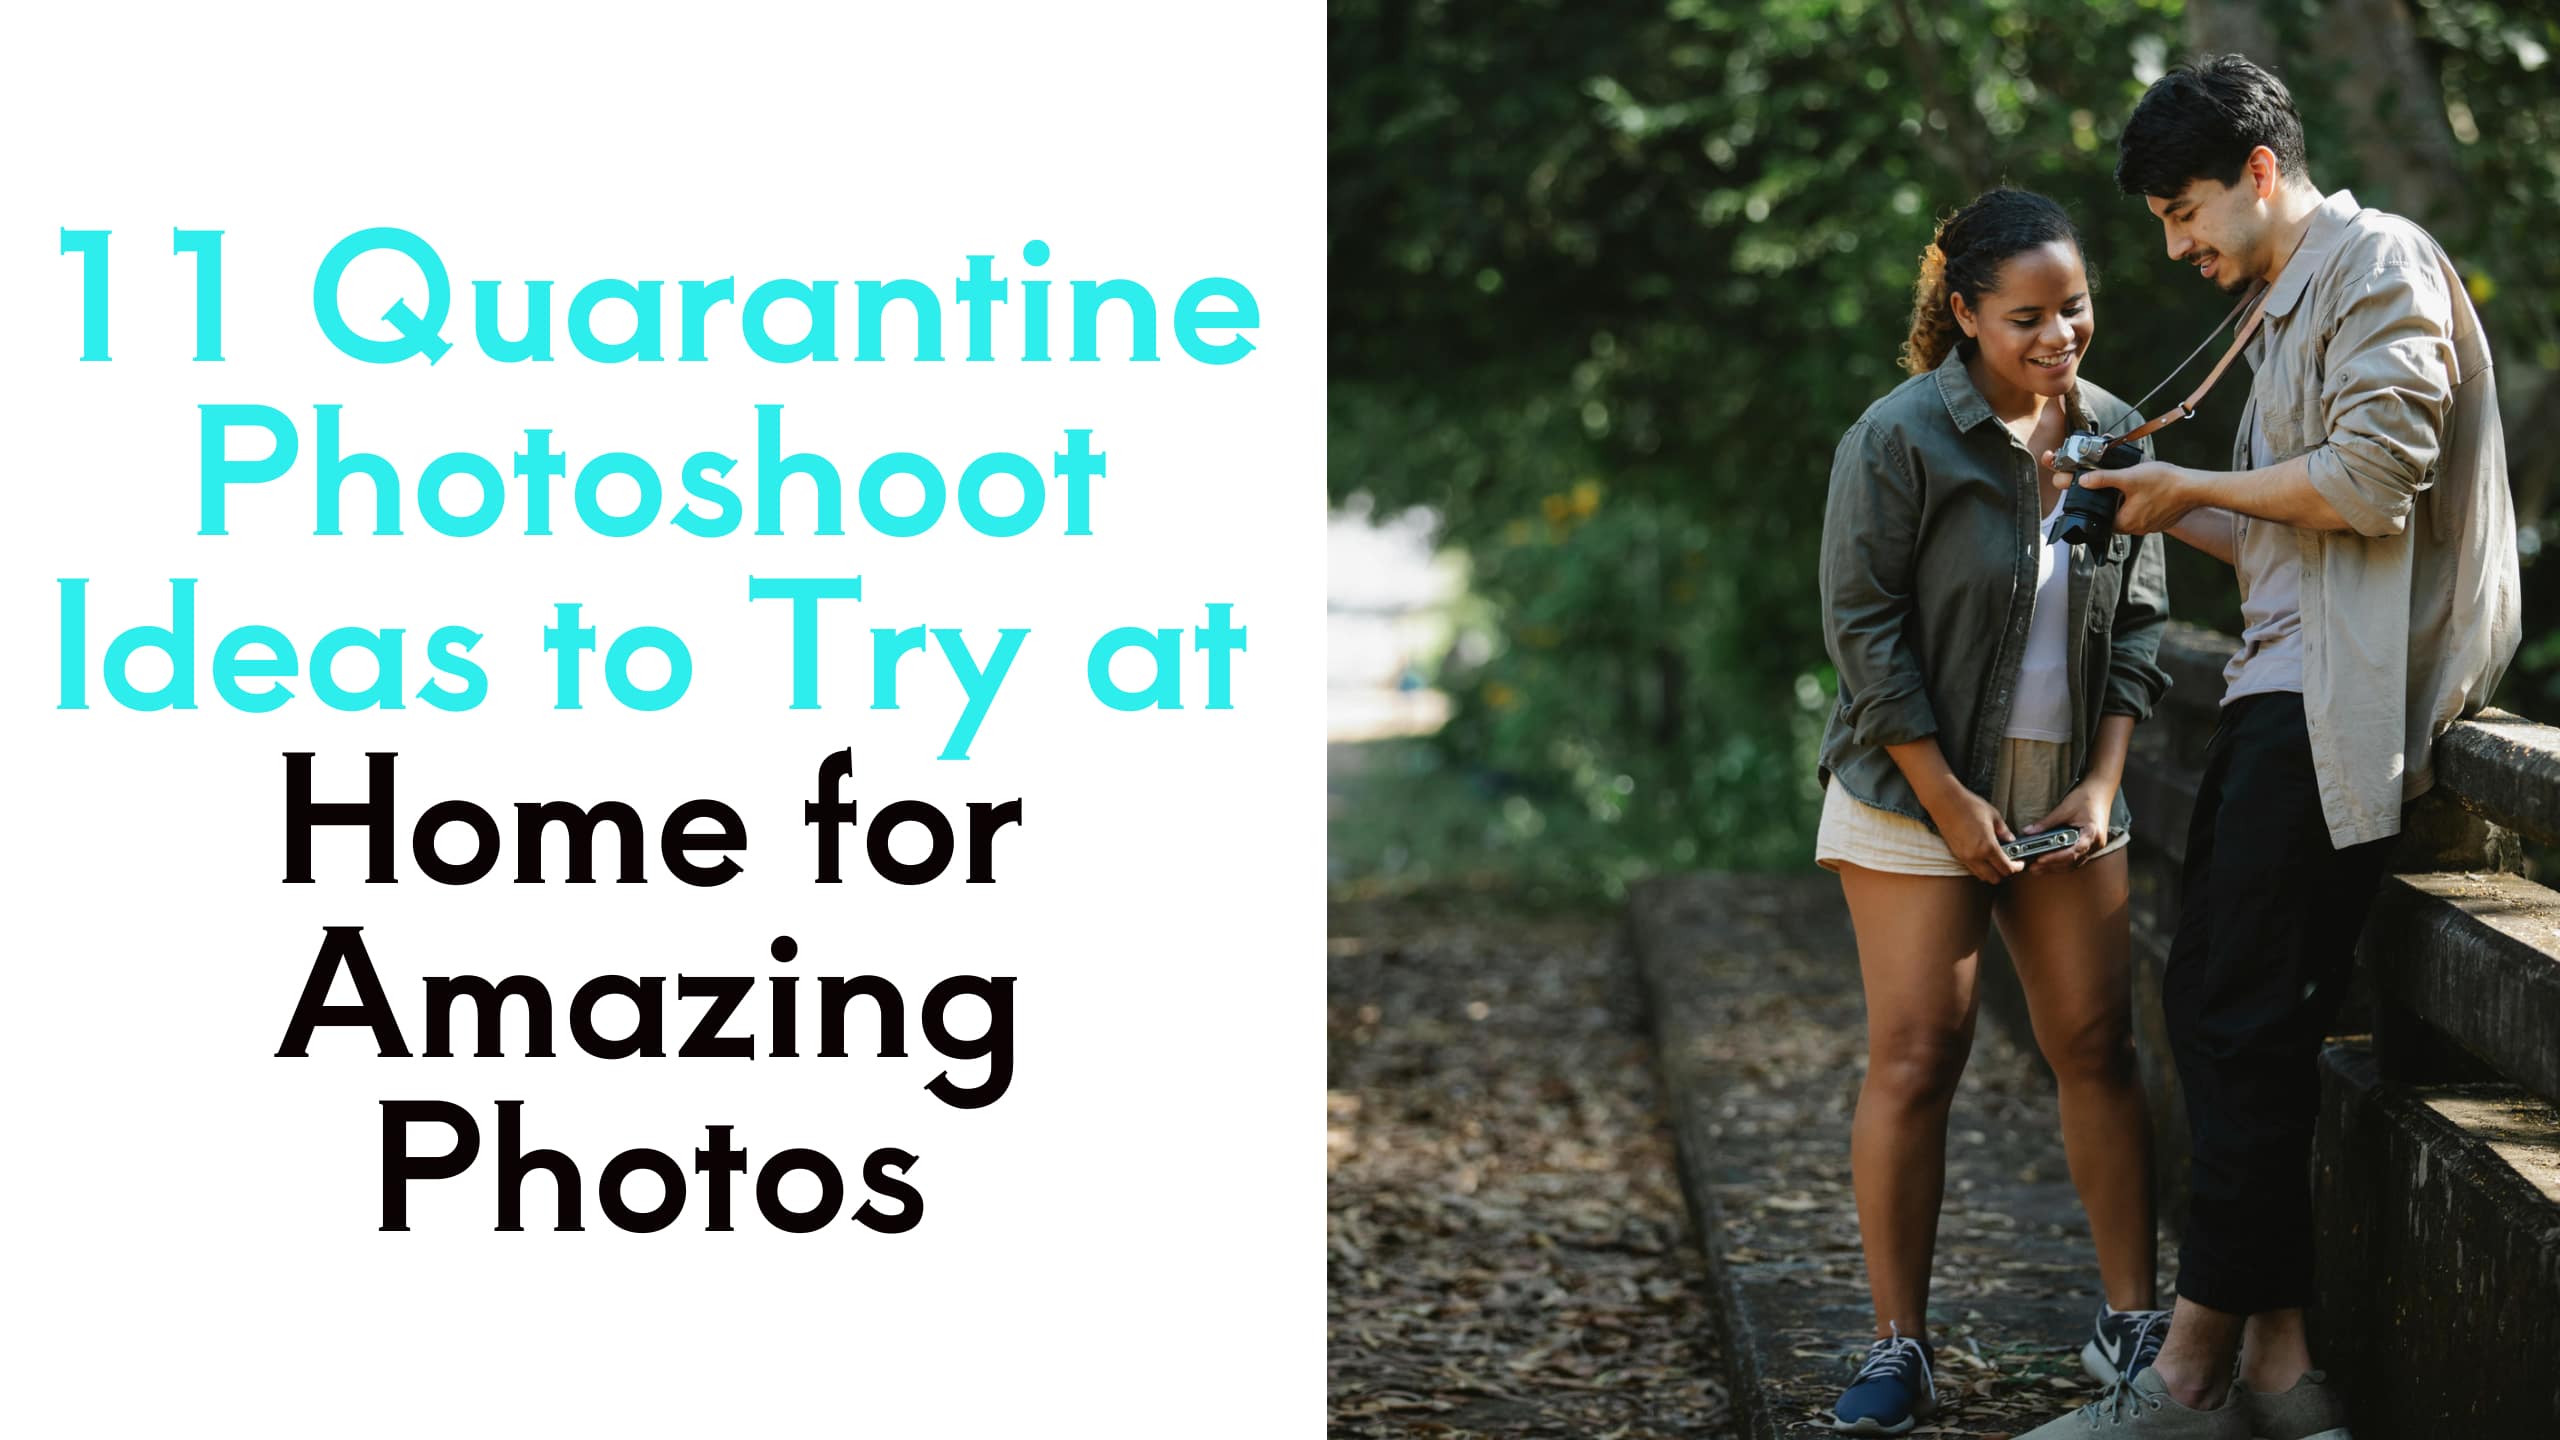 11 Quarantine Photoshoot Ideas to Try at Home for Amazing Photos